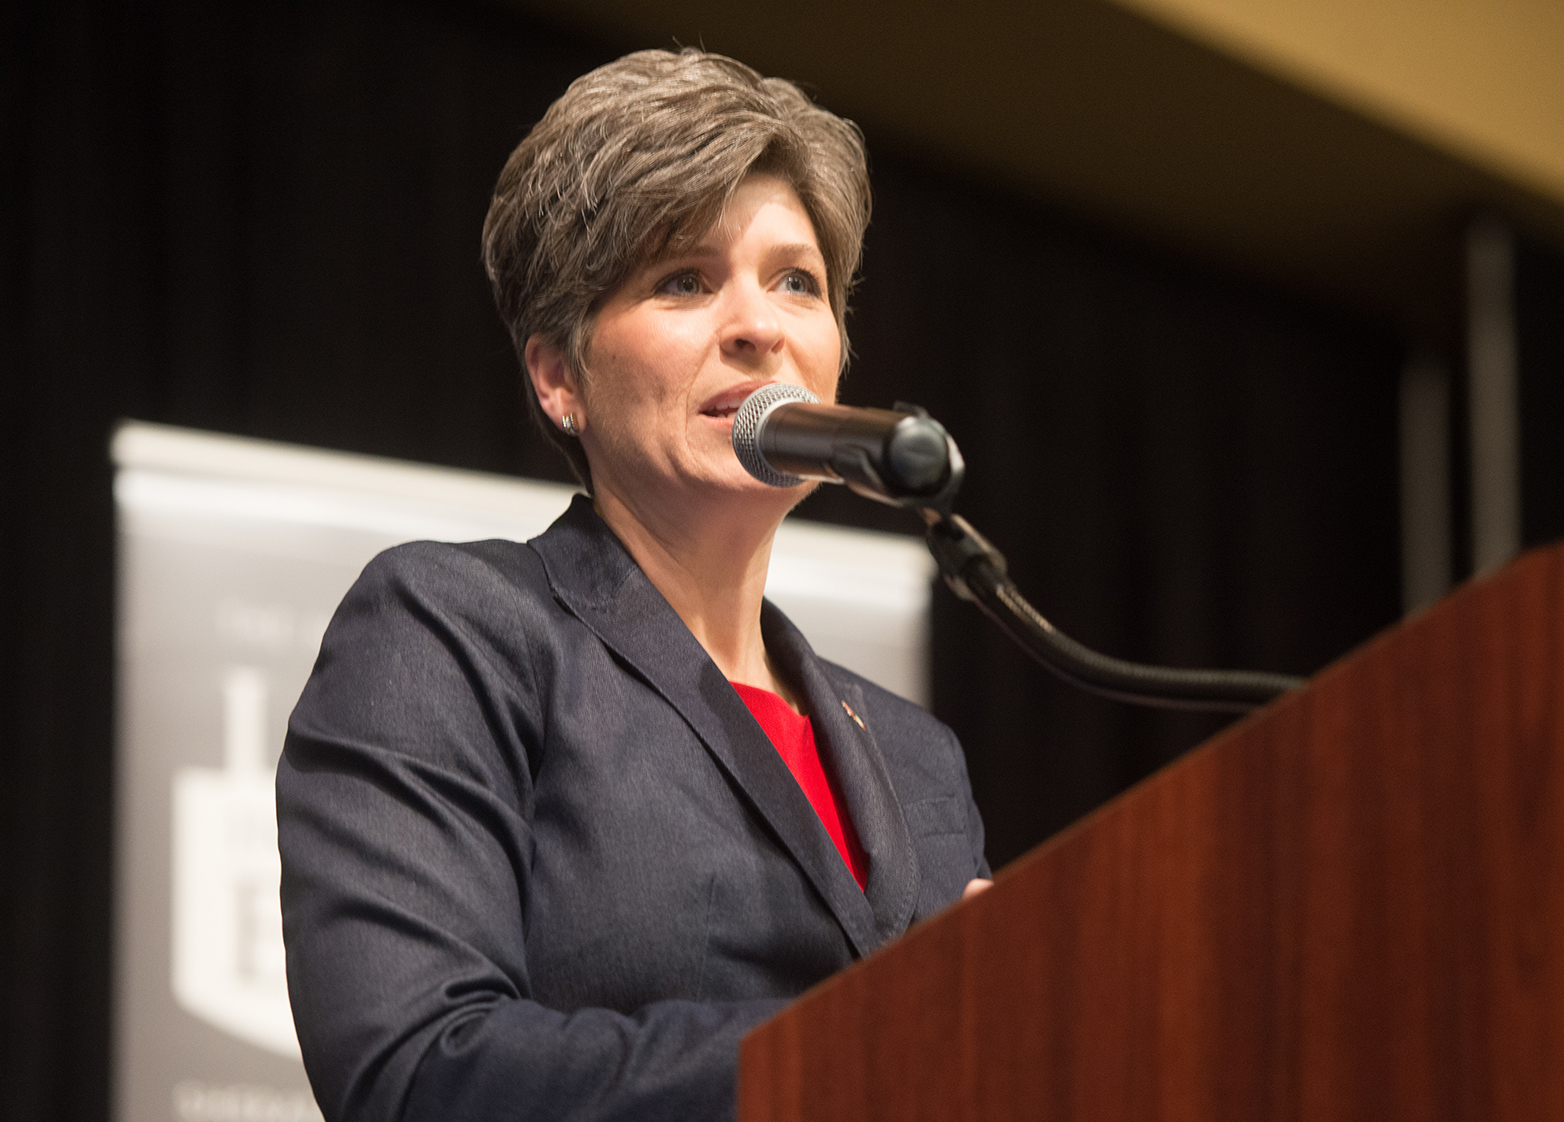 Senator Joni Ernst held a telephone town hall with cons